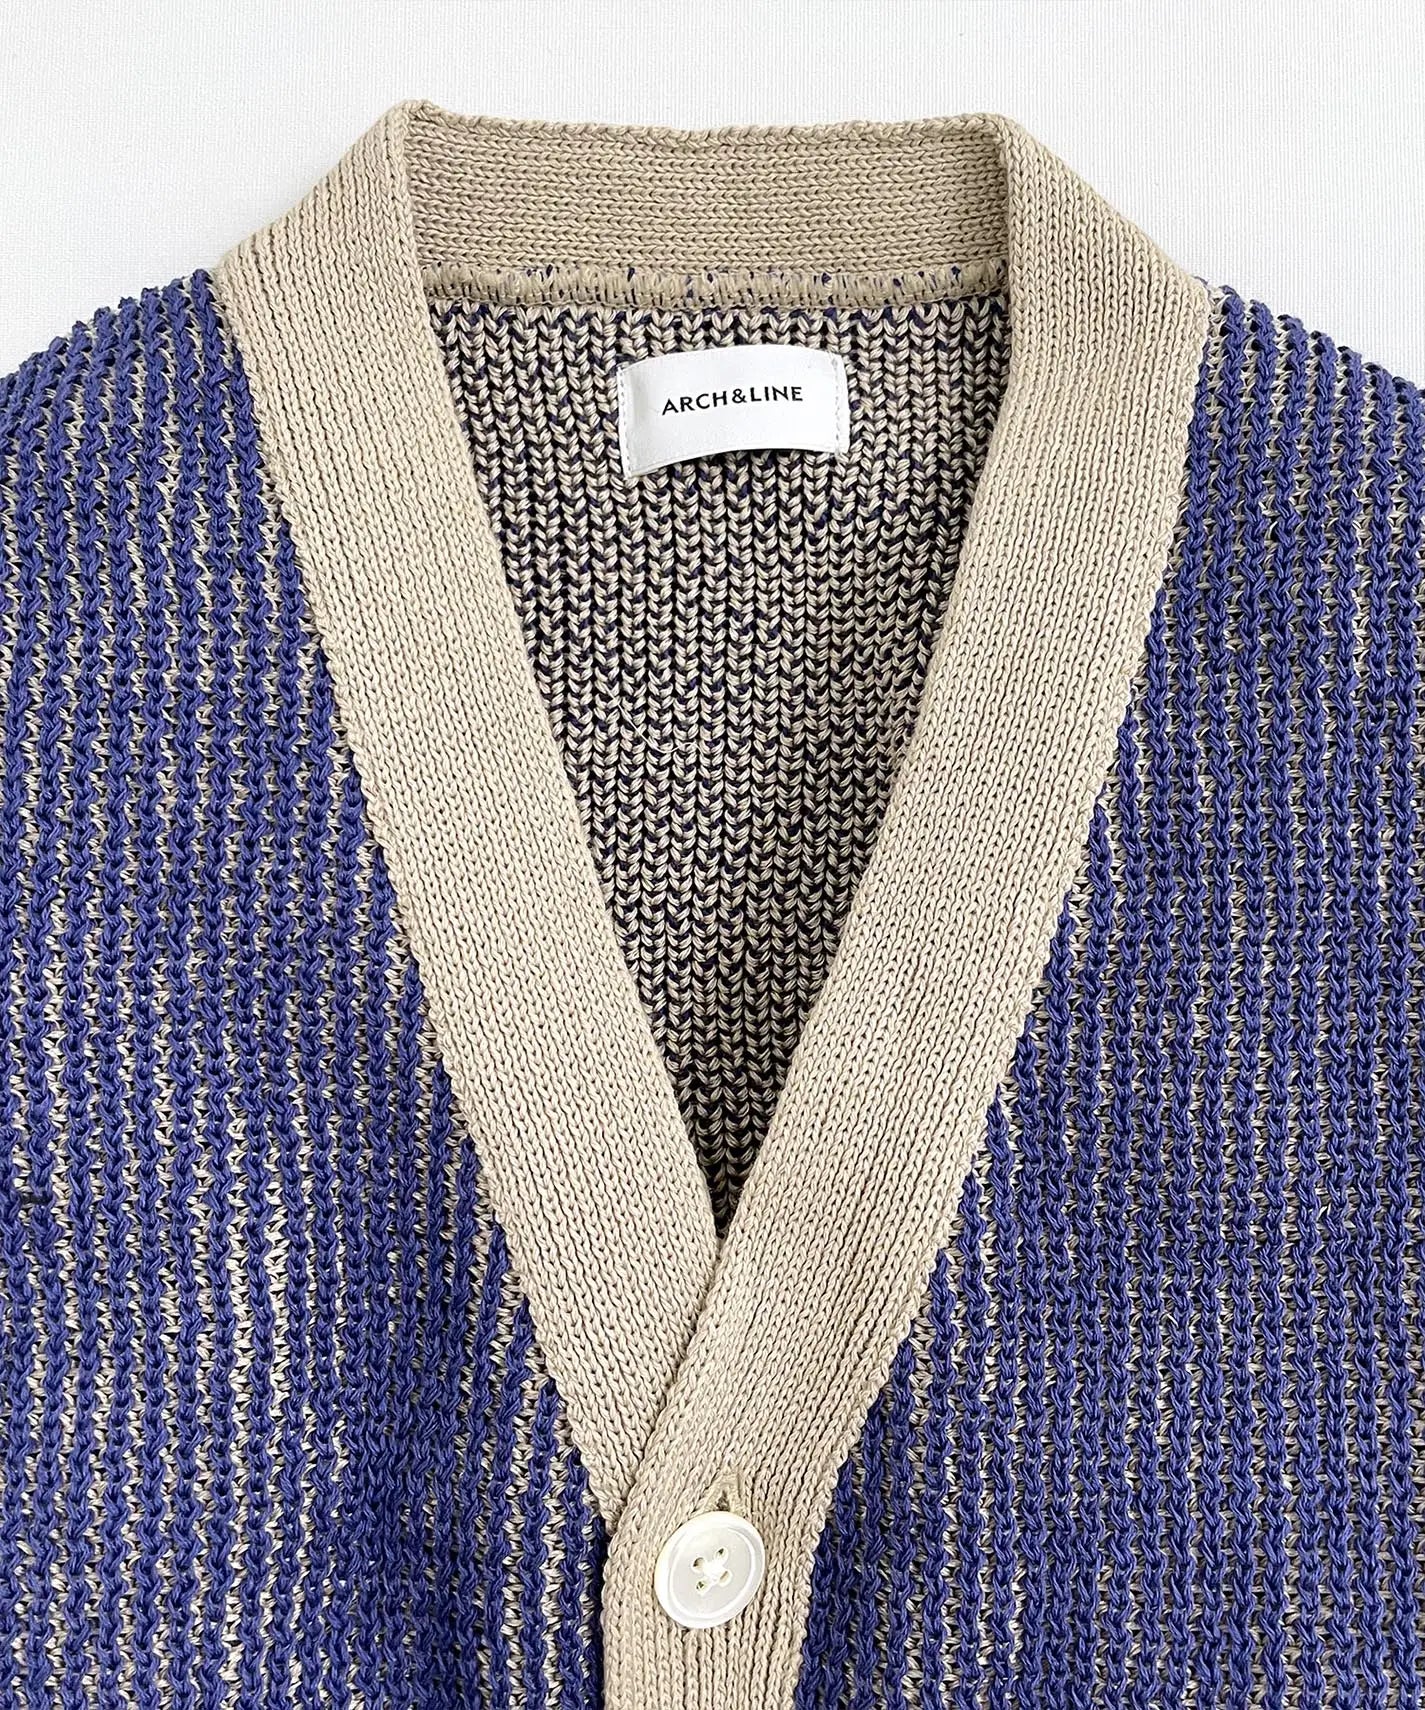 GIMA STRIPE KNIT CARDIGAN Made in Japan 100% Cotton Occasion [100-145cm]